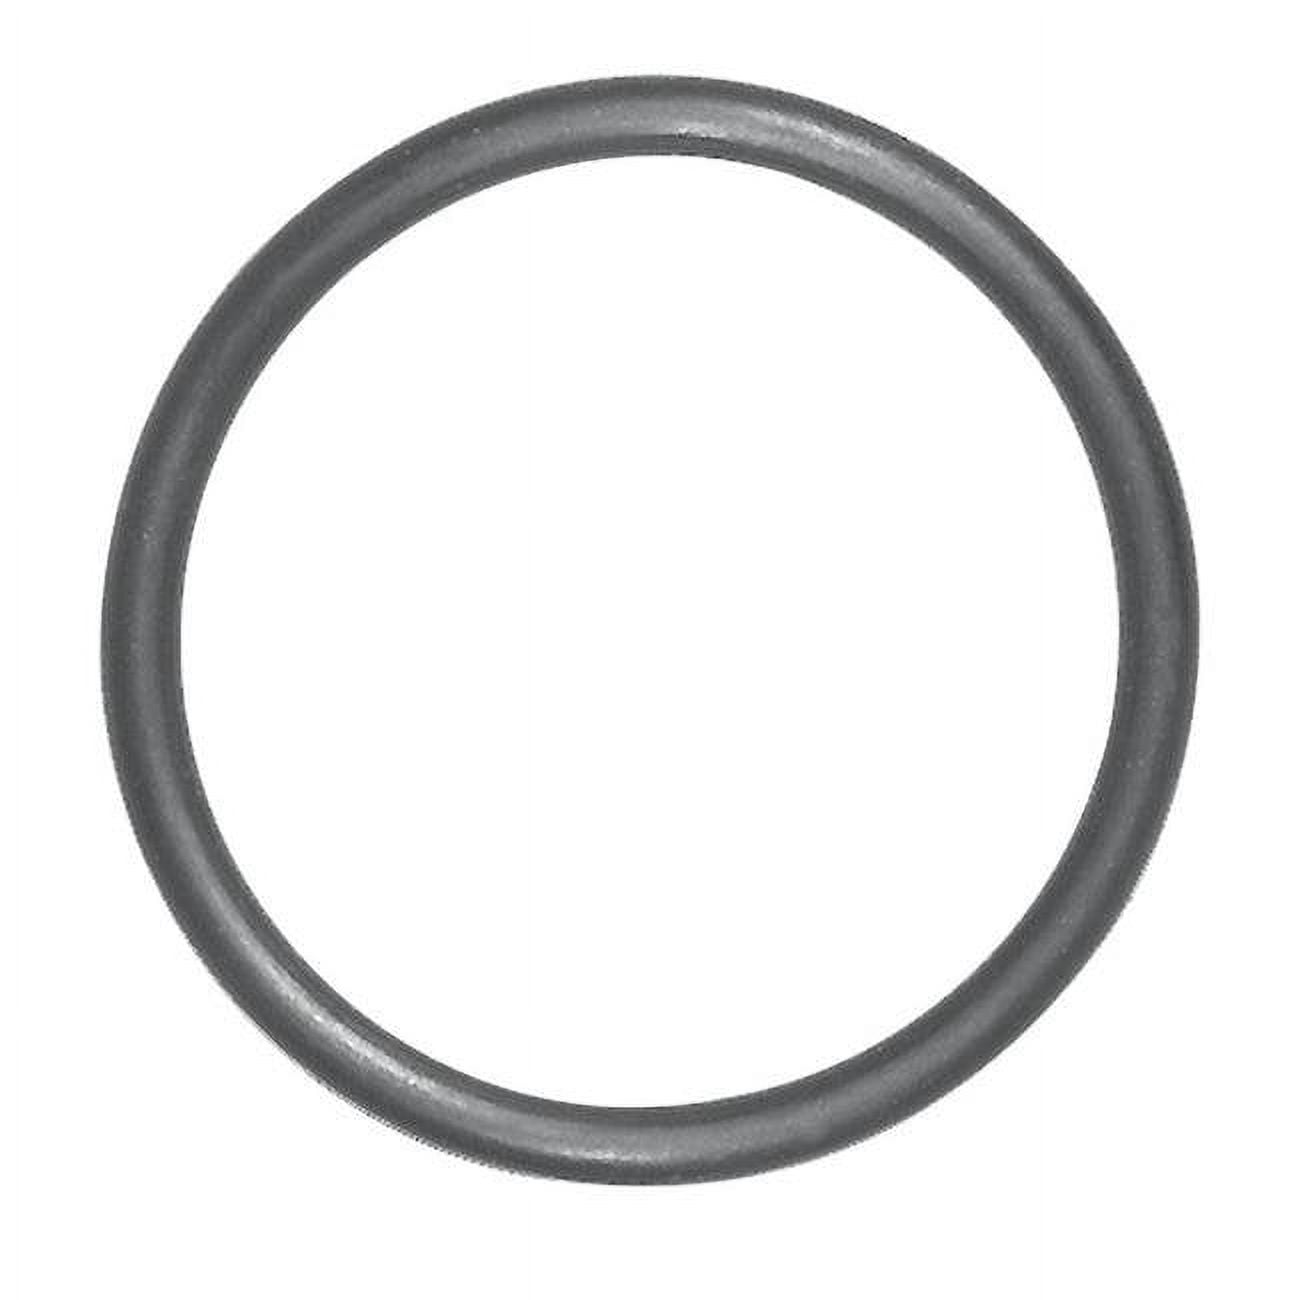 35778b 1.31 X 1.12 In. O Ring- Pack Of 5